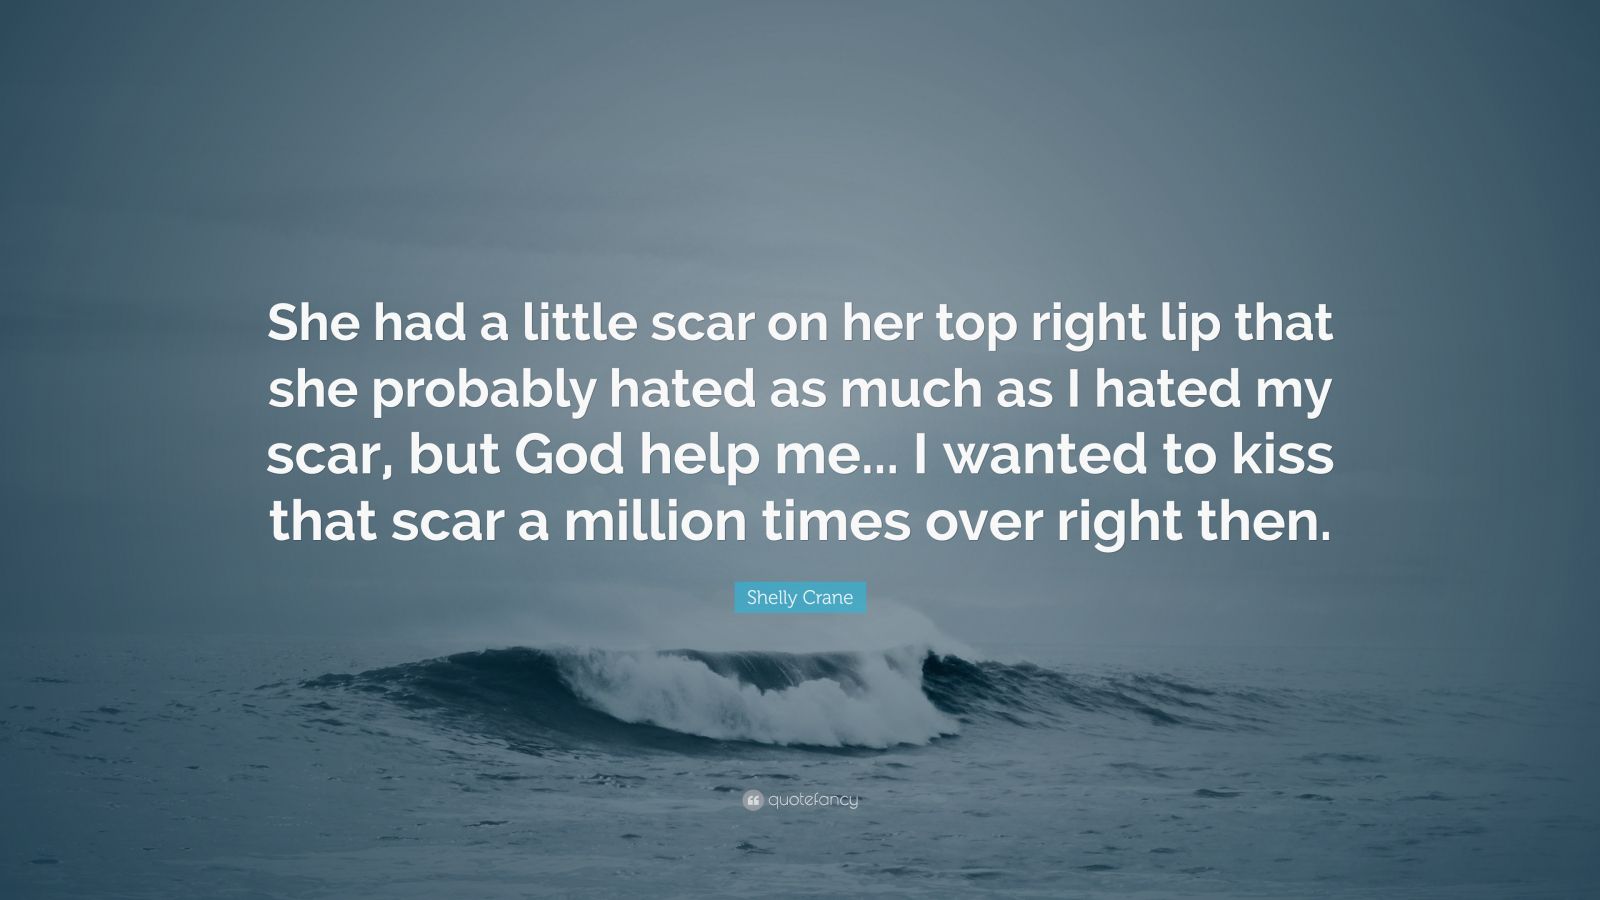 Shelly Crane Quote: “She had a little scar on her top right lip that ...